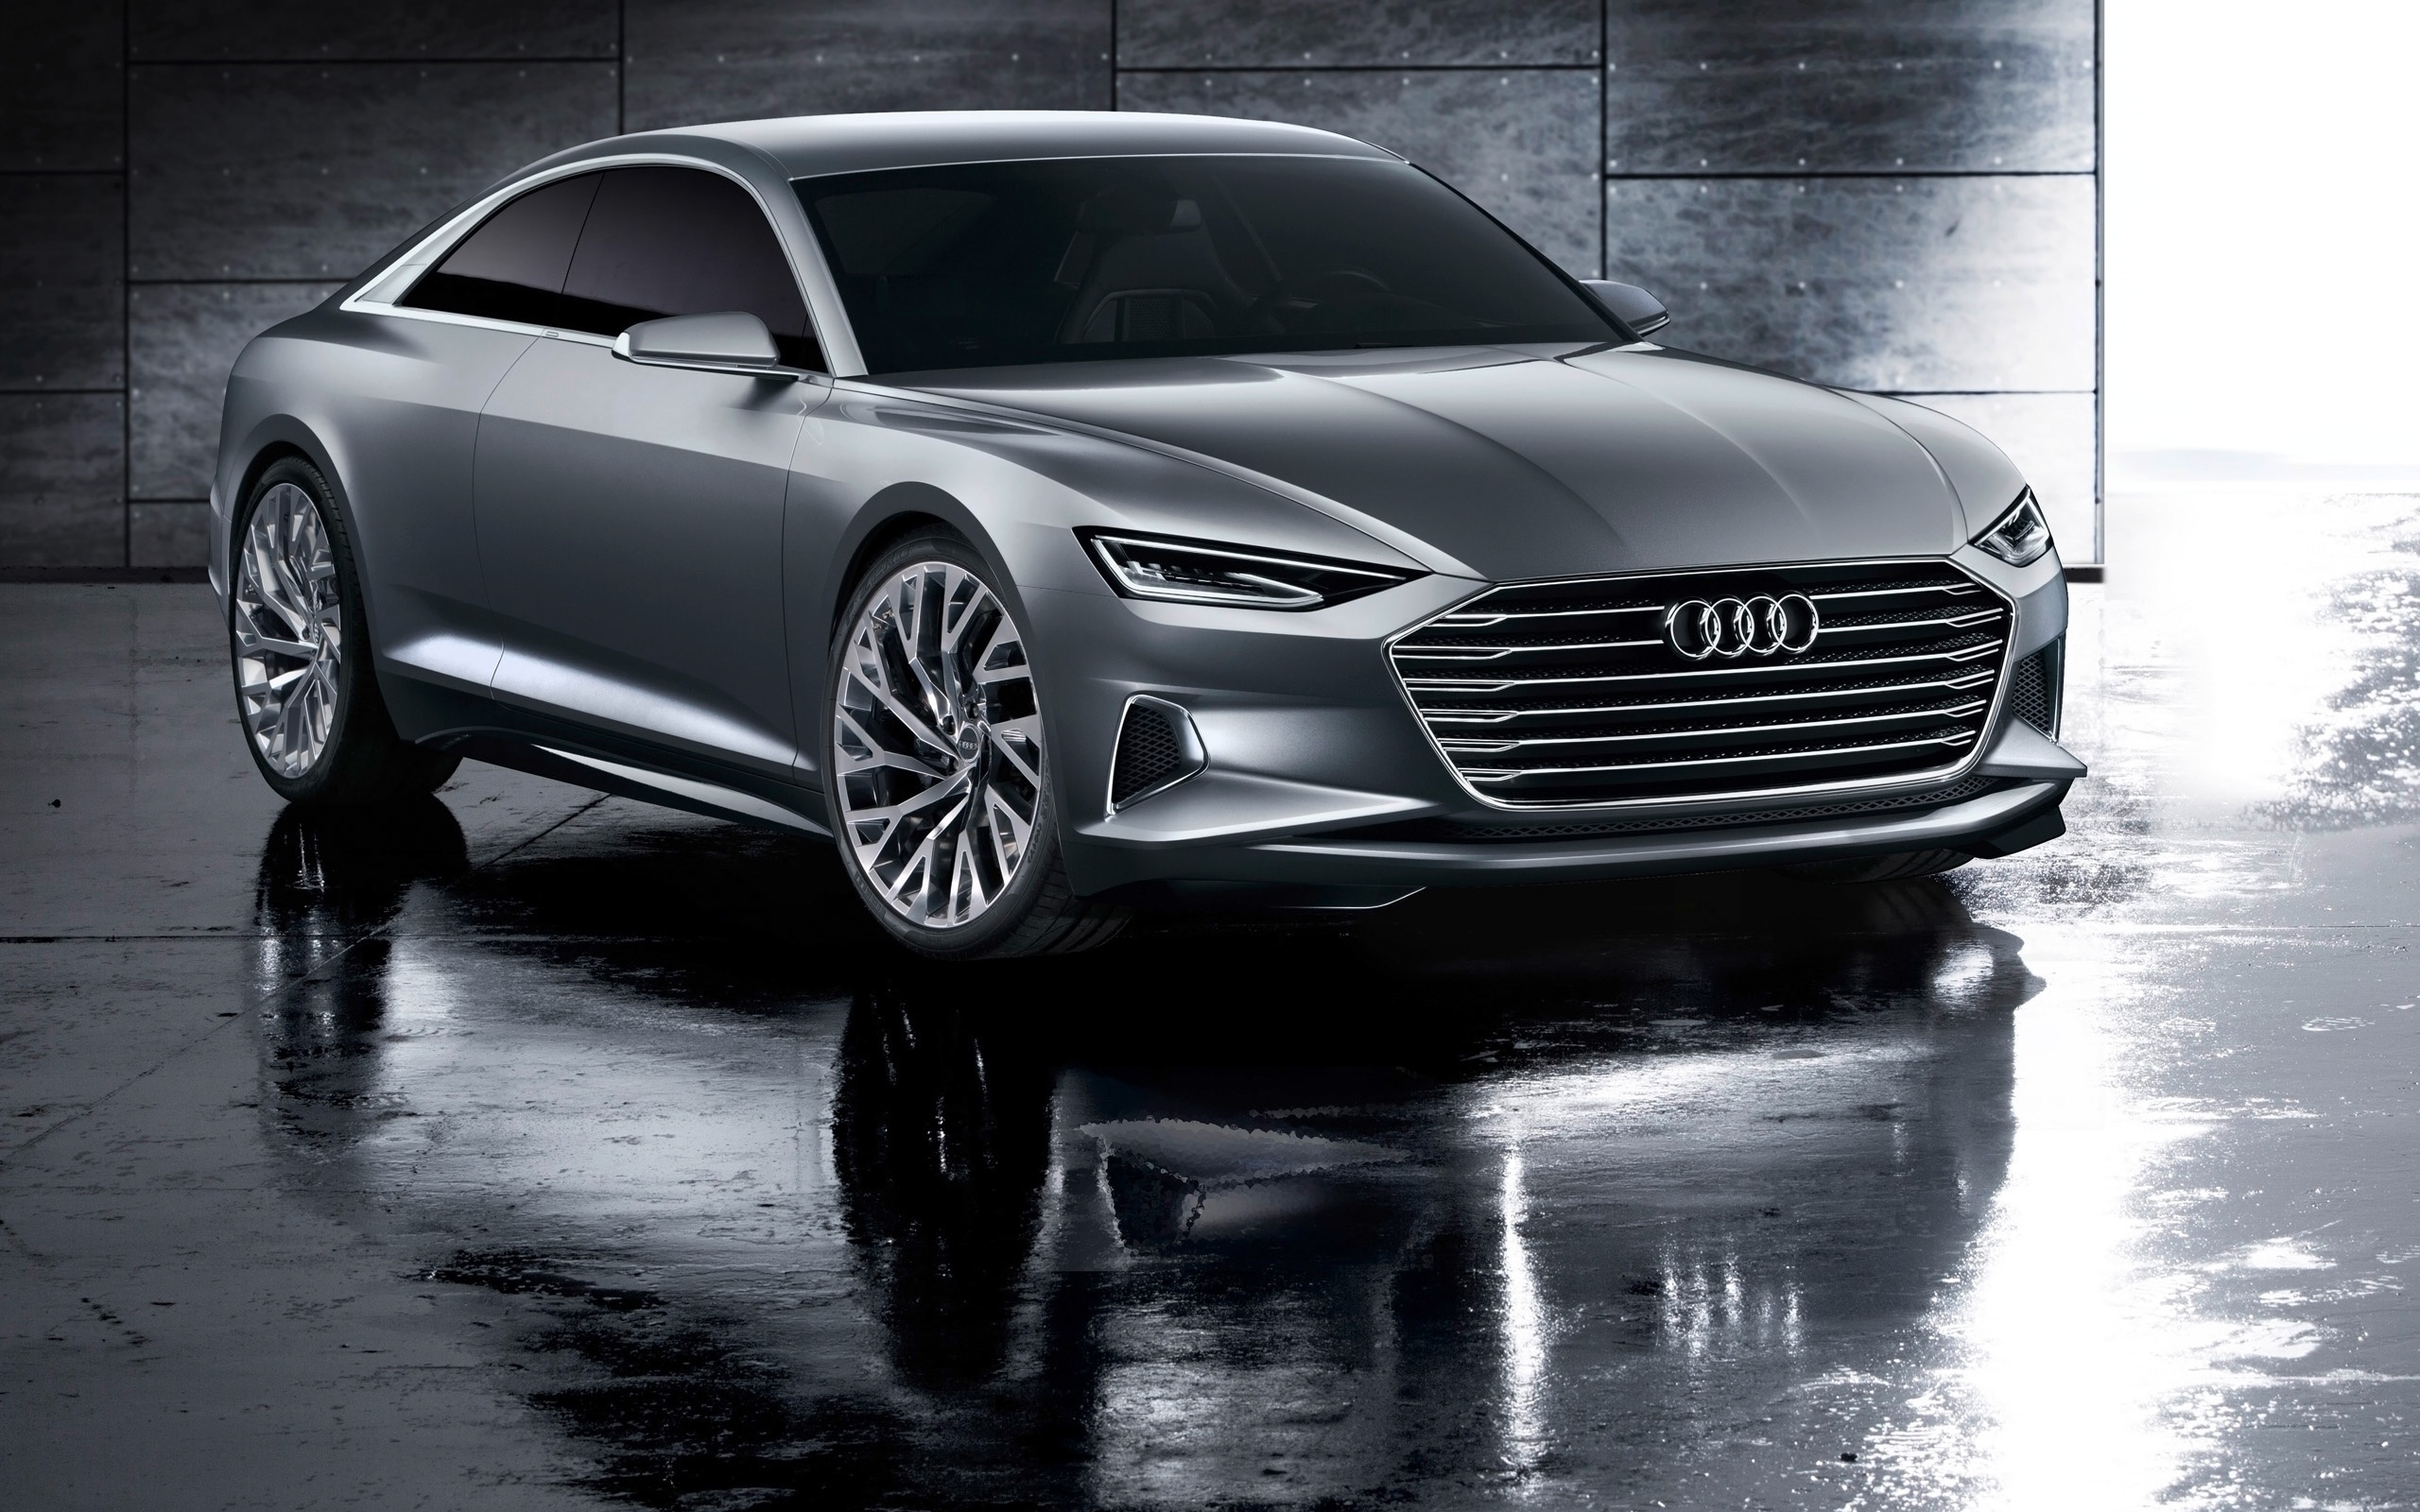 Audi Prologue Concept Wallpaper in jpg format for free